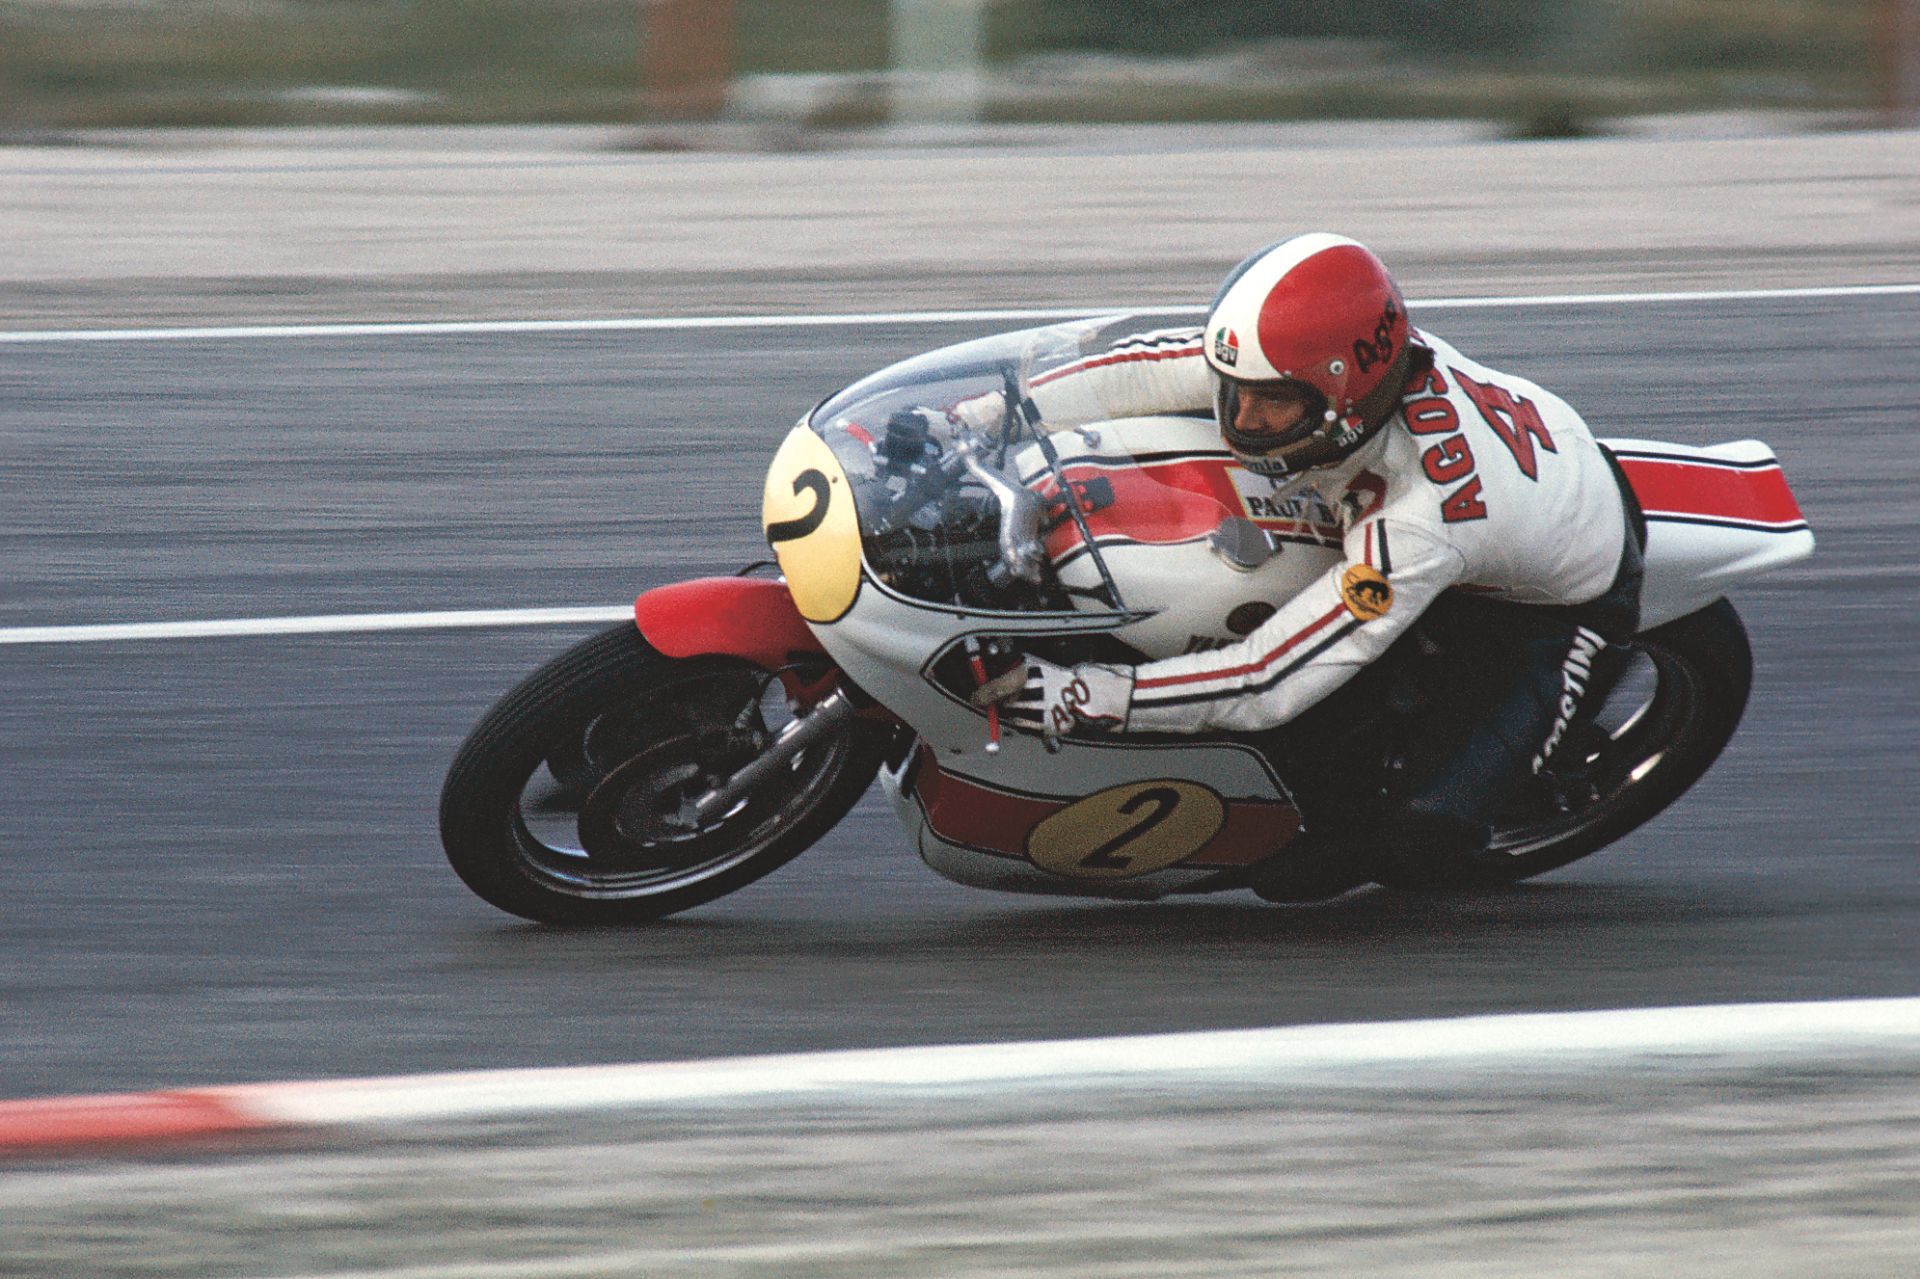 Giacomo Agostini in full race leathers on Yamaha YZR750 in 1975